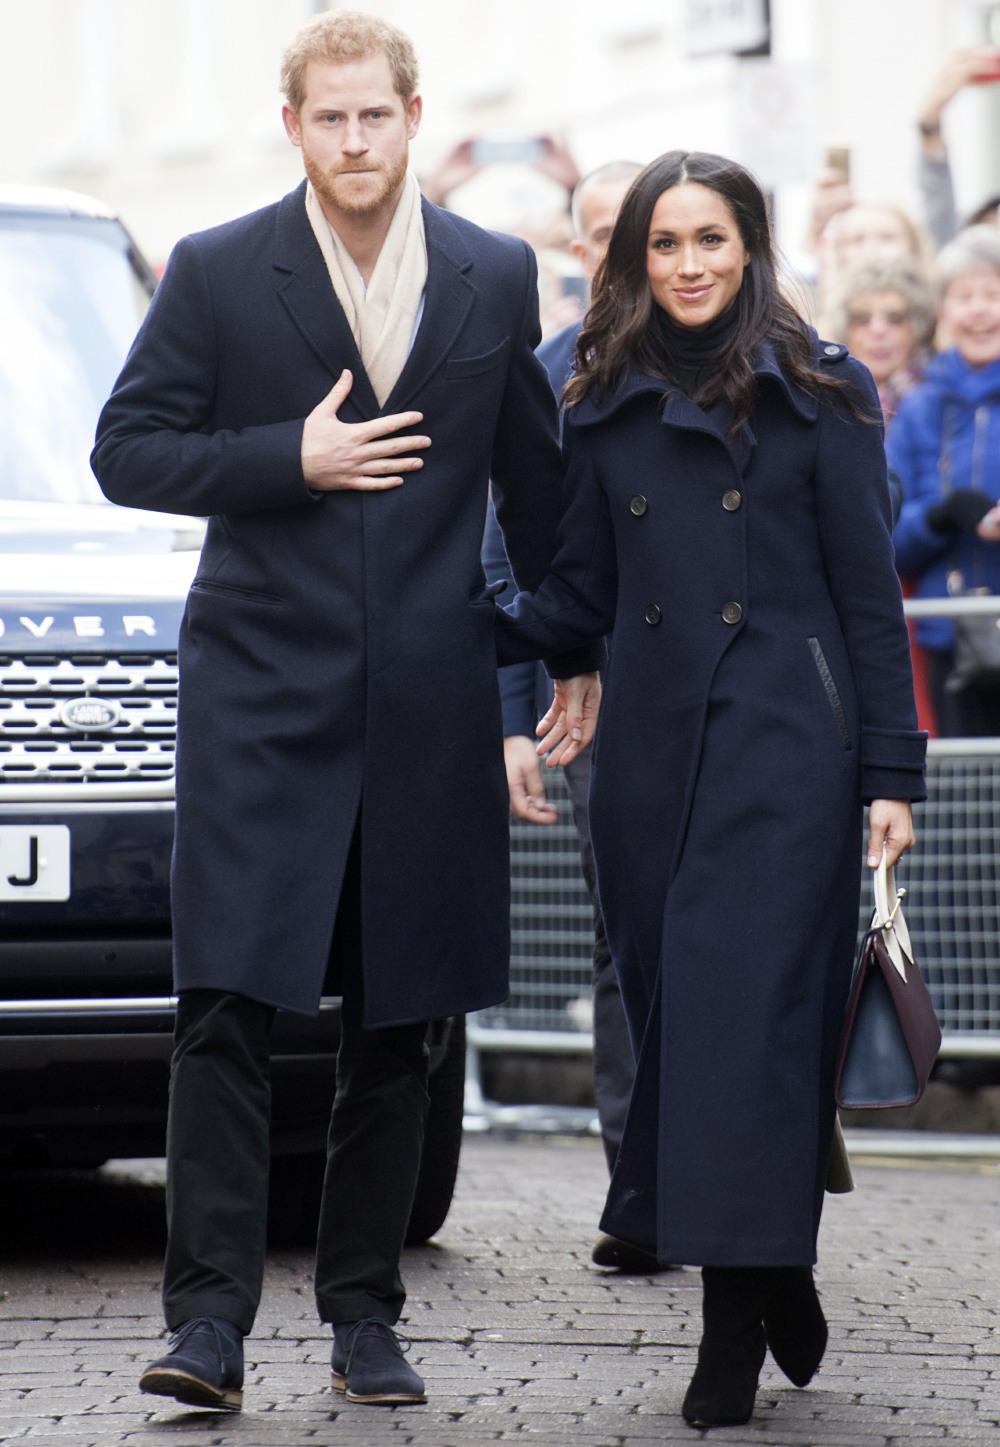 MEGHAN MARKLE AND PRINCE HARRY IN NOTTINGHAM TODAY01/12/201